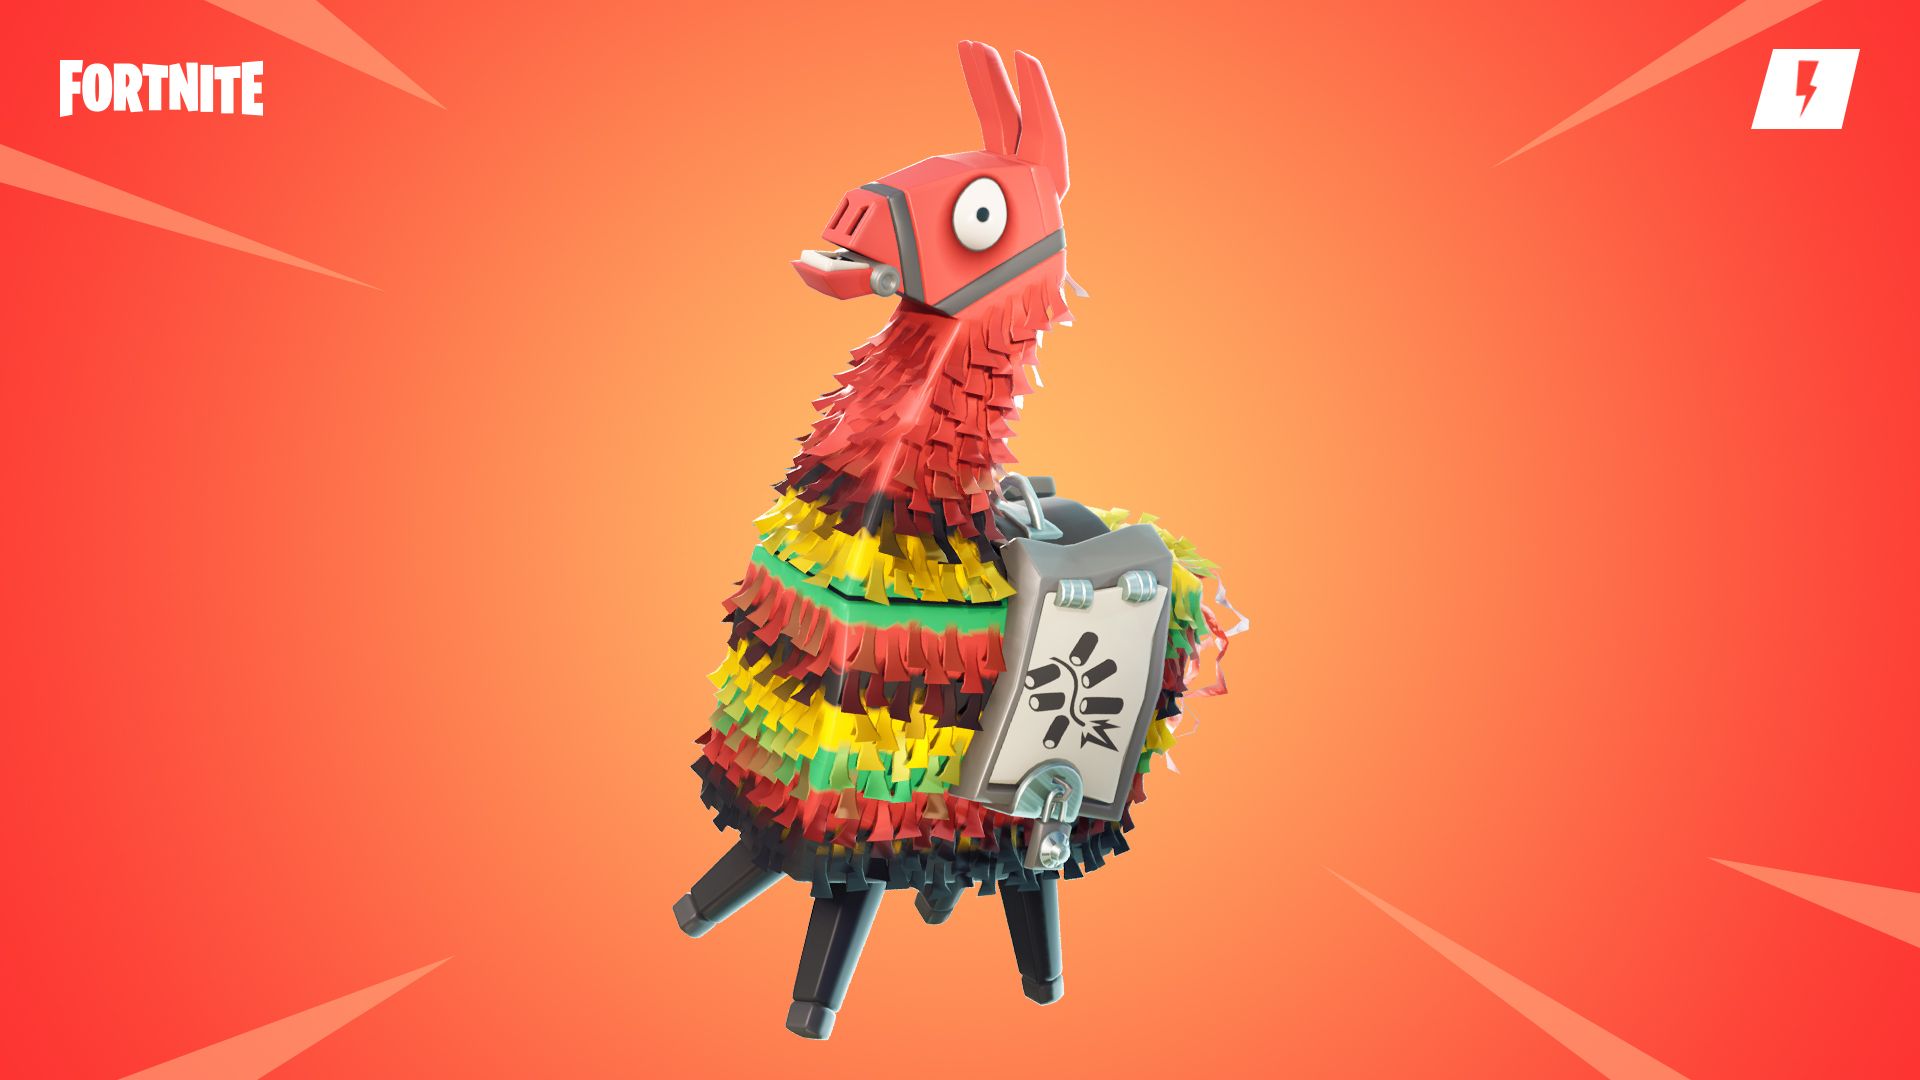 Fortnite might of the Dragon weapons and Chinese New Year Heroes. crammed into one tiny Llama! Pick up the Lunar Llama from the Llama shop in #SavetheWorld